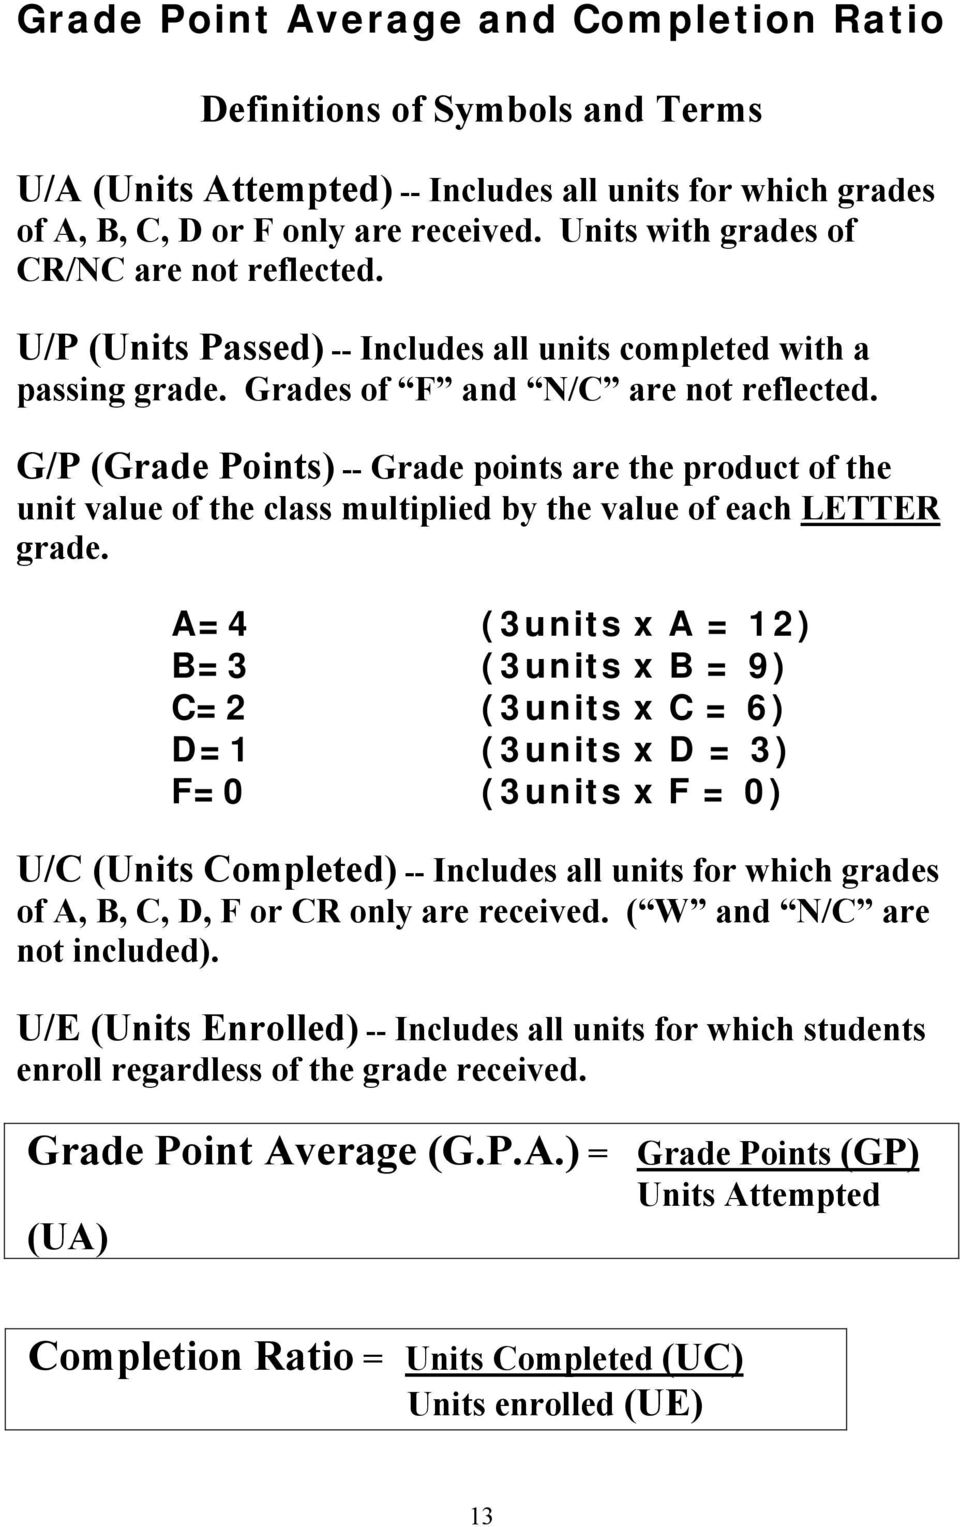 G/P (Grade Points) -- Grade points are the product of the unit value of the class multiplied by the value of each LETTER grade.